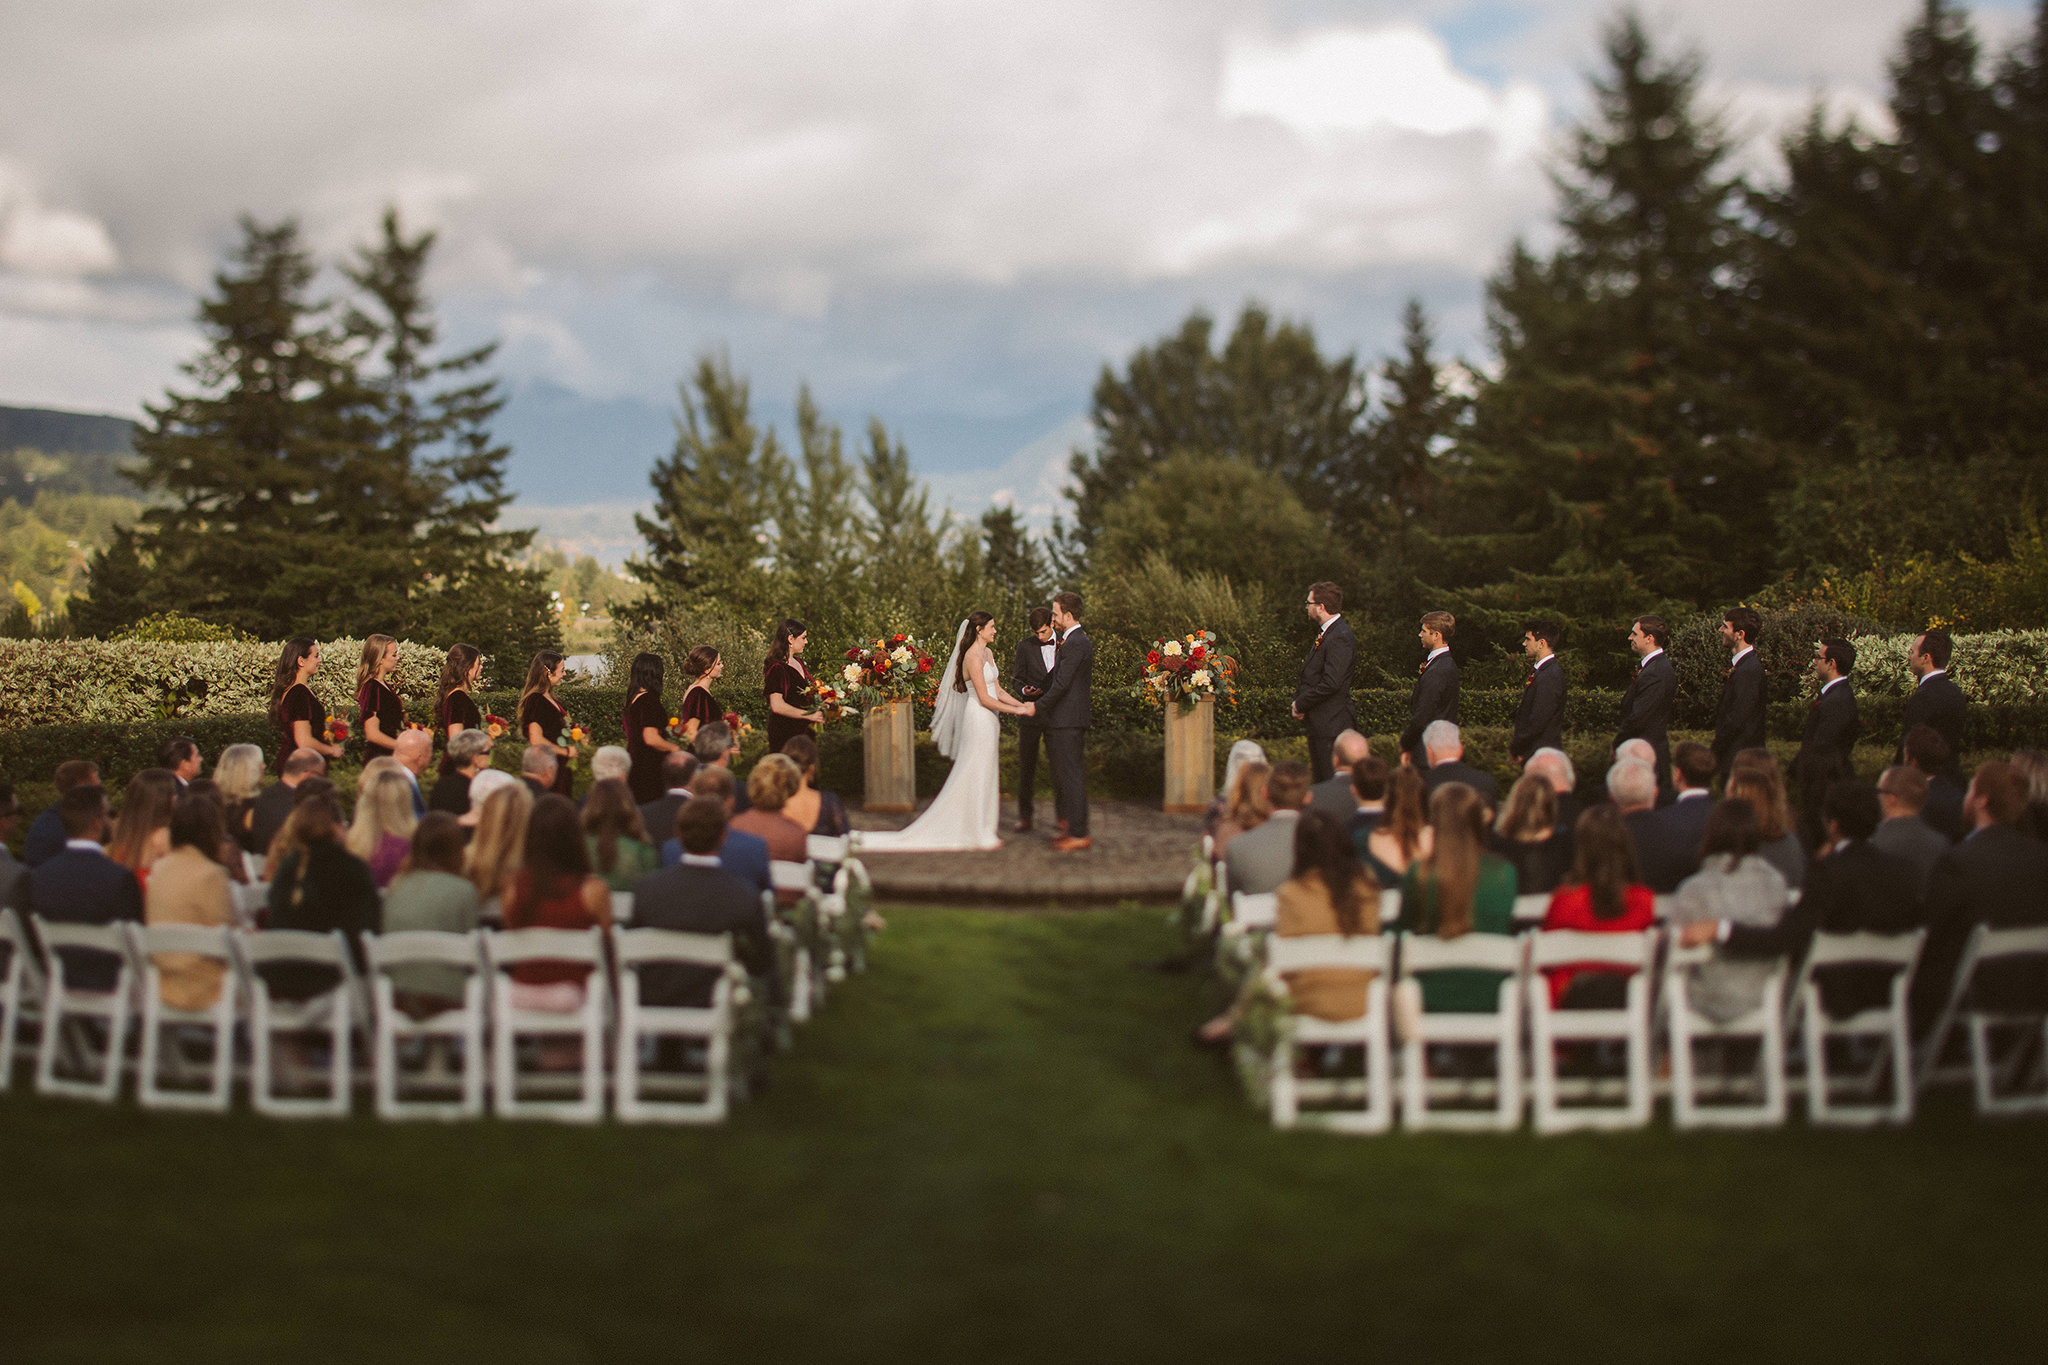 An outdoor wedding ceremony at Skamania Lodge on the Columbia River Gorge